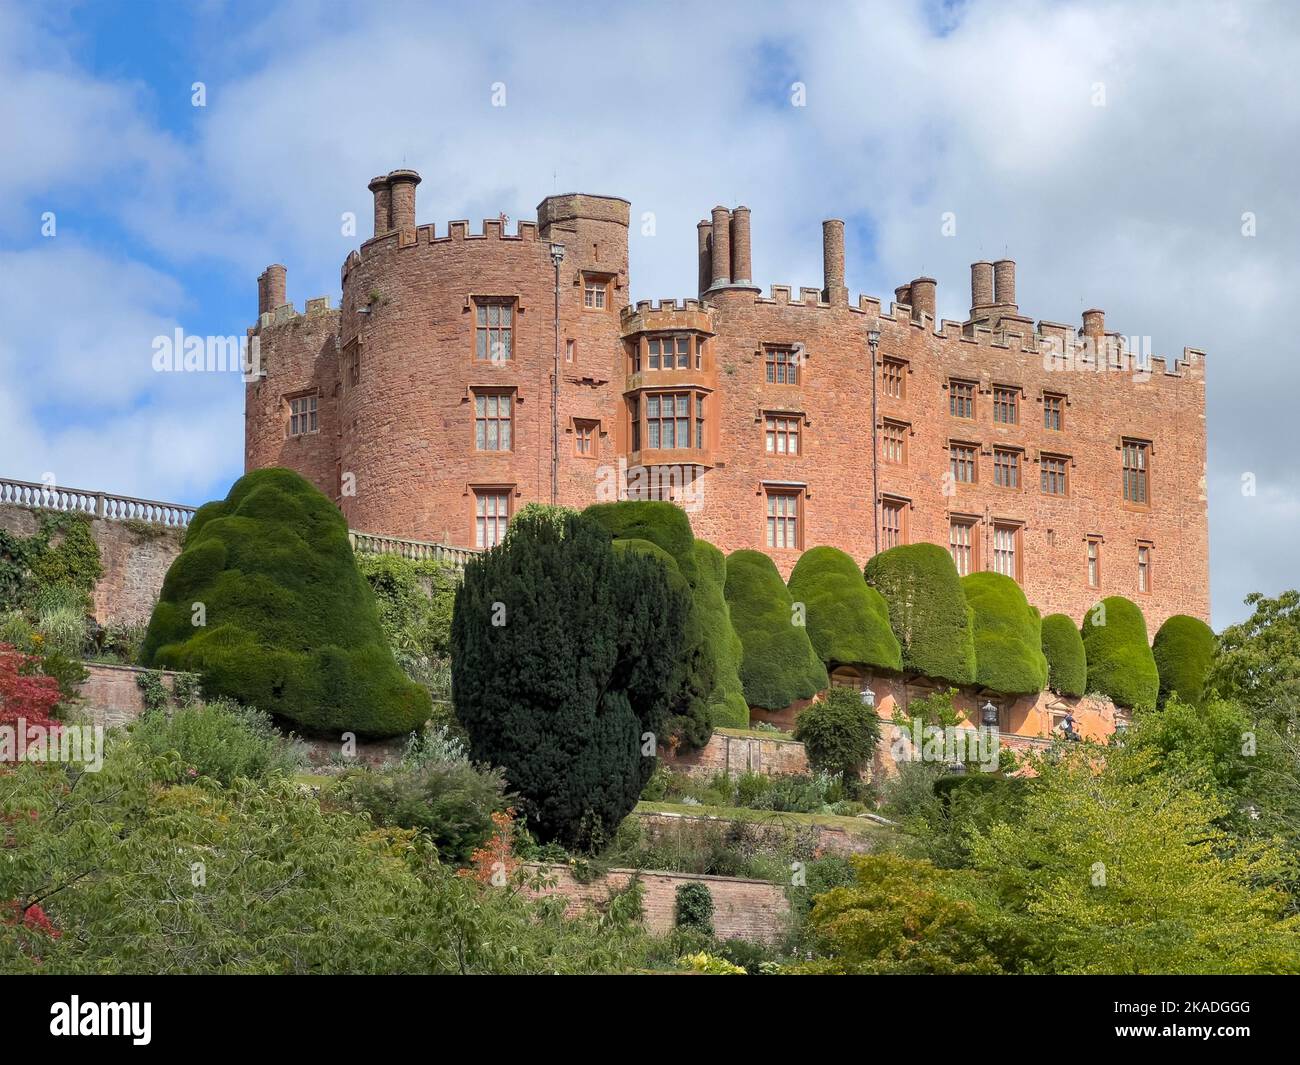 Powis Castle - a medieval castle, fortress and grand country house near Welshpool, in Powys, Wales. Stock Photo